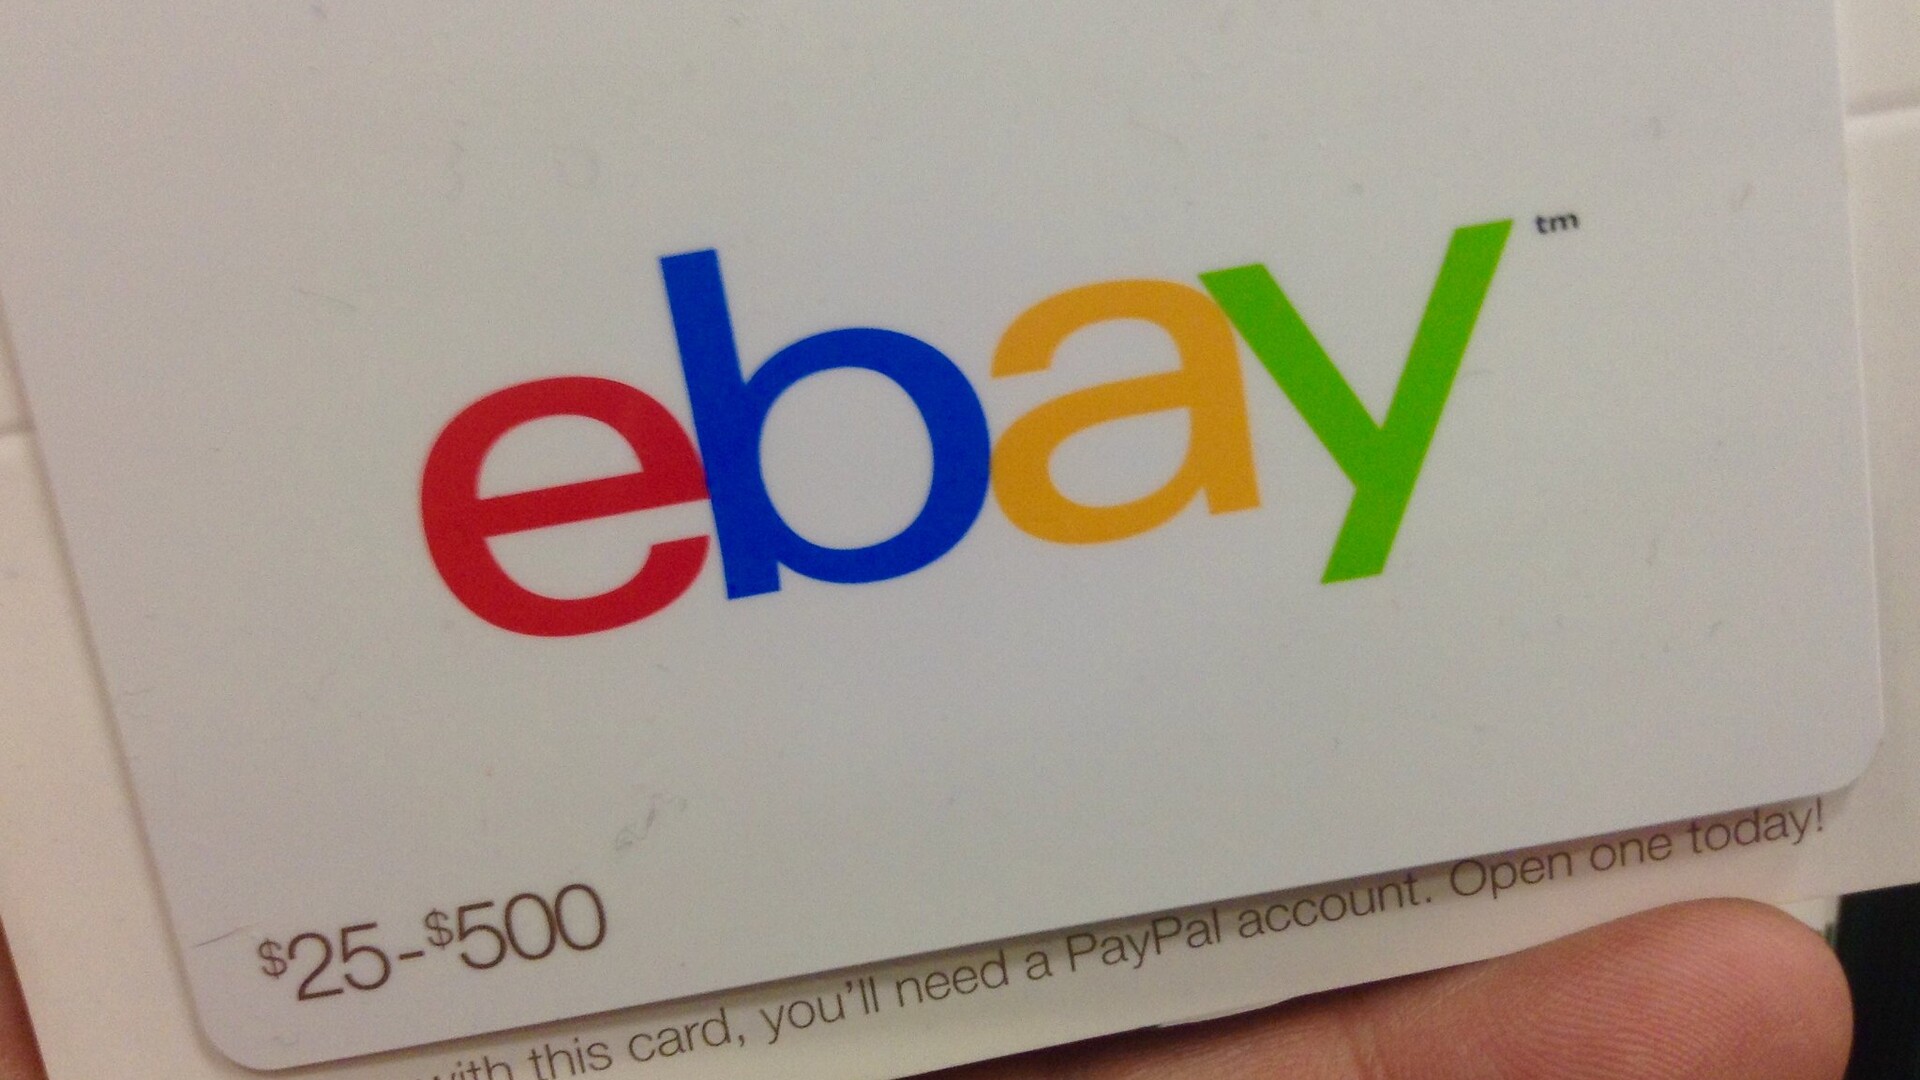 Federal Complaint Alleges Environmental Violations by eBay